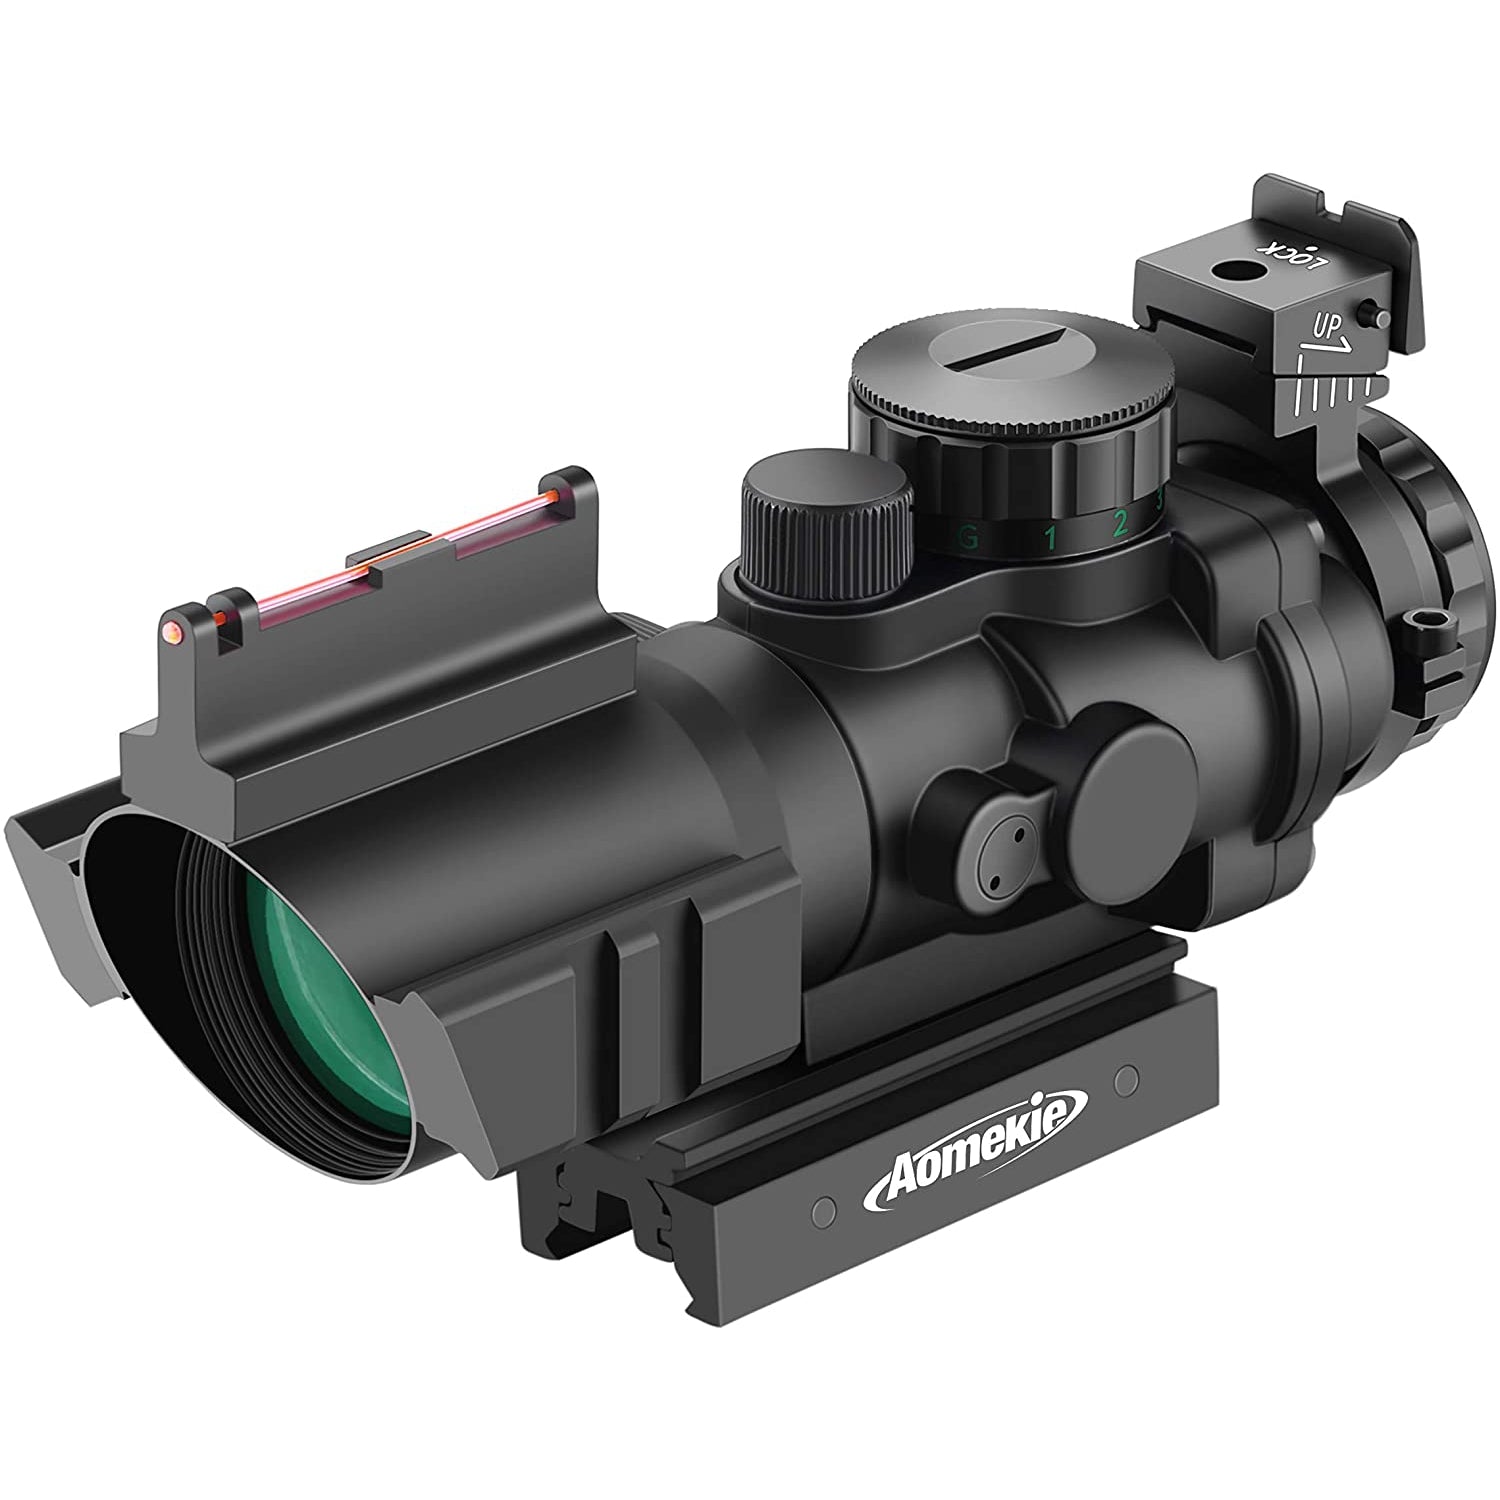 Aomekie Air Rifle Scope 4X32mm Red/Green/Blue Illuminated Rapid Range Reticle Airsoft Red Dot Sight Scope with Top Fiber Optic Sight